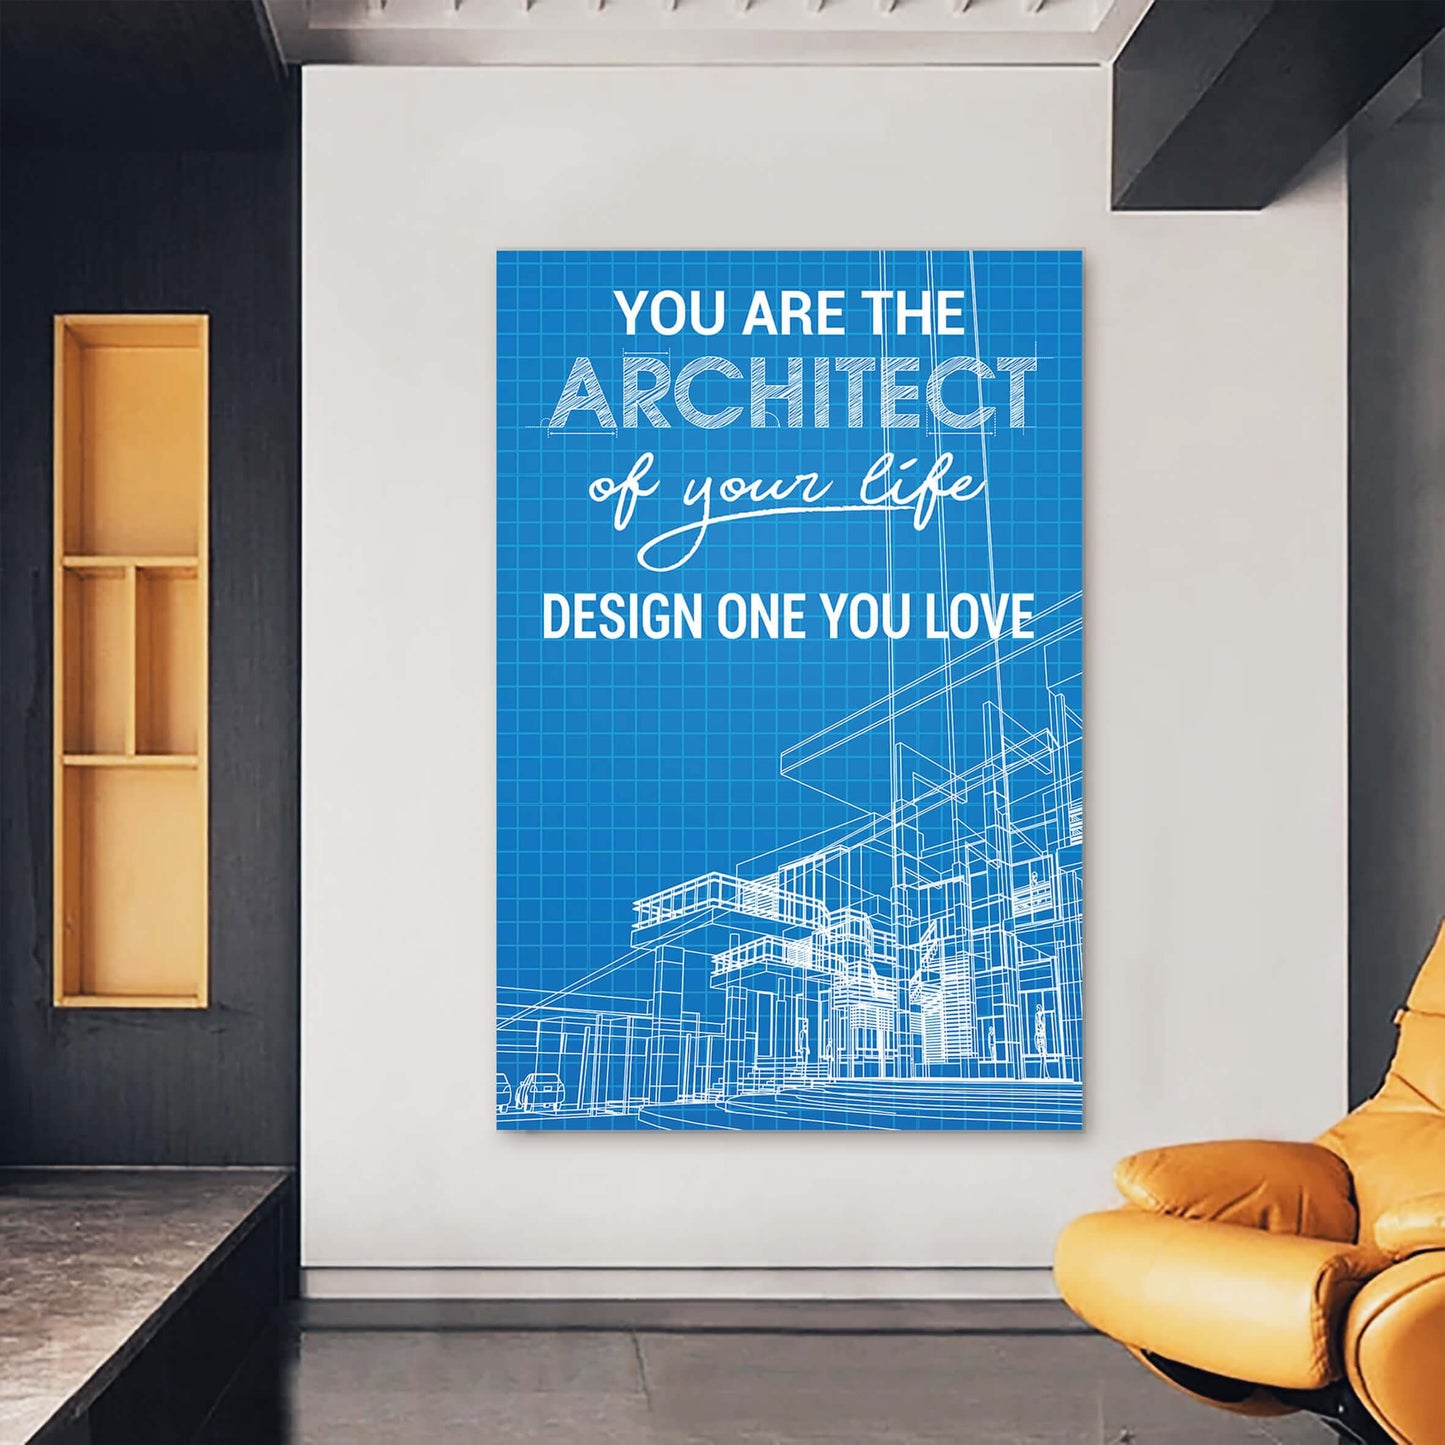 You Are The Architect of Tomorrow Wall Art | Inspirational Wall Art Motivational Wall Art Quotes Office Art | ImpaktMaker Exclusive Canvas Art Portrait